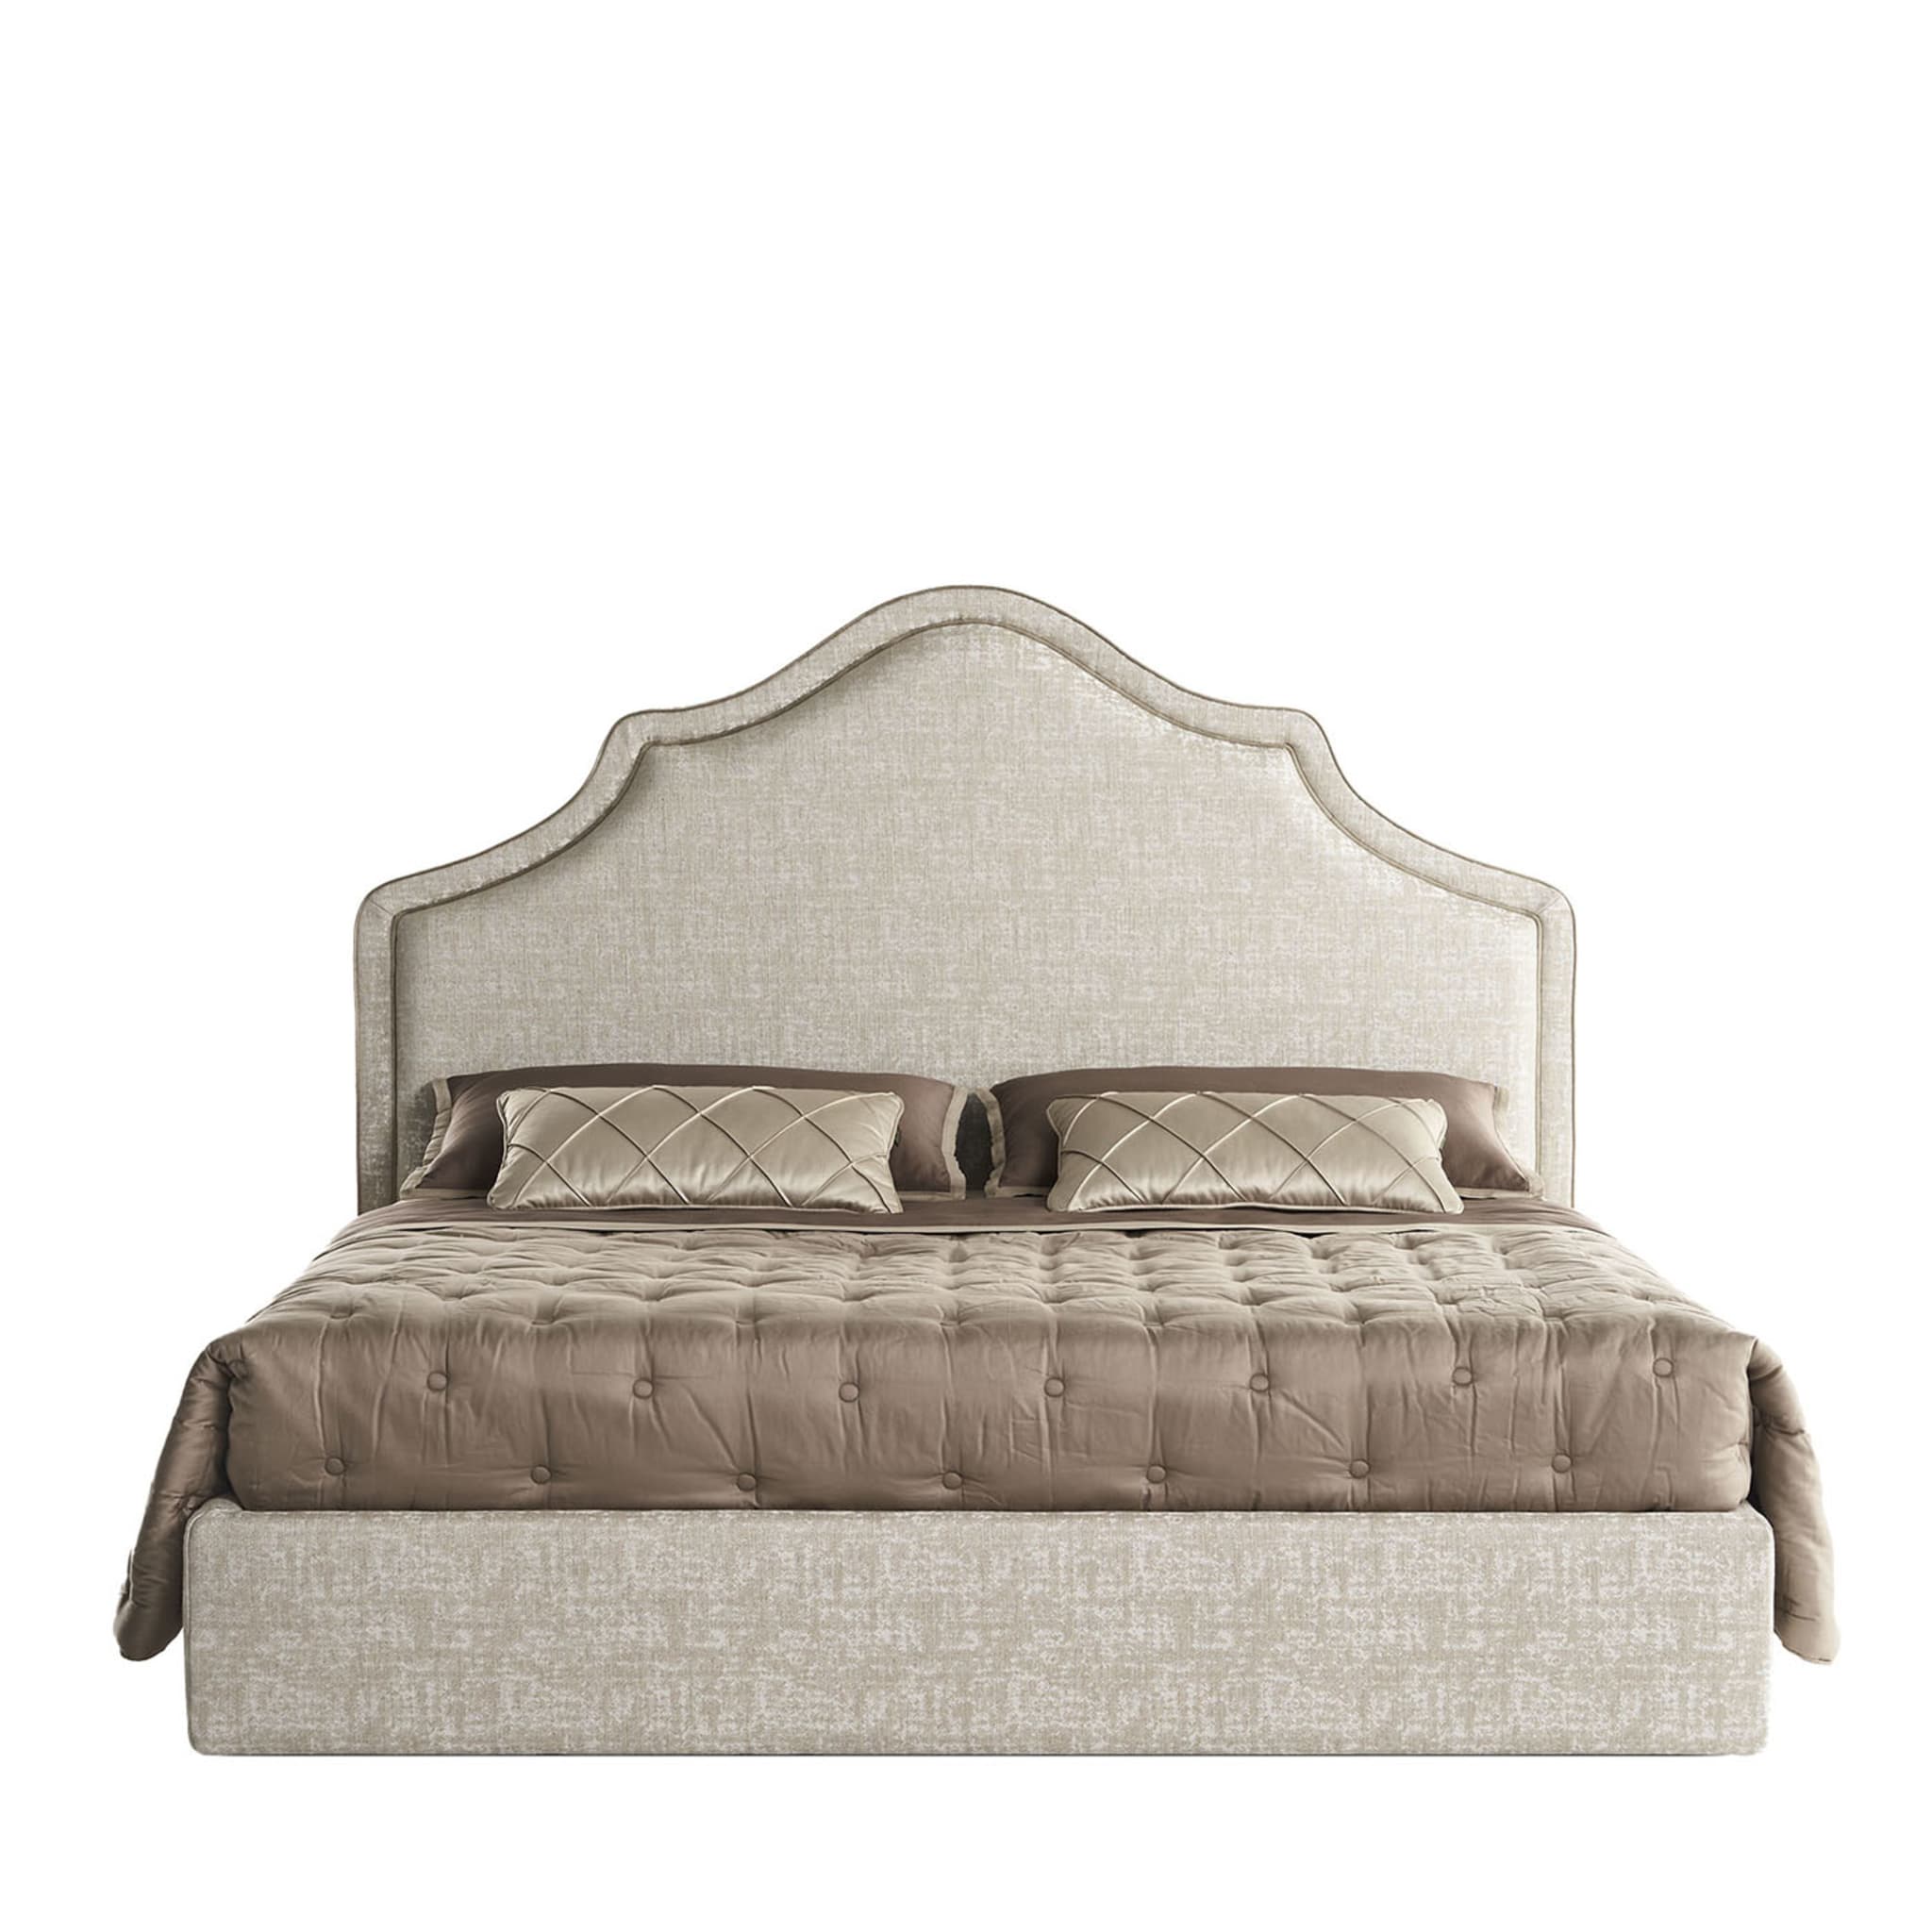 Alan Melange Taupe Double Bed - Main view